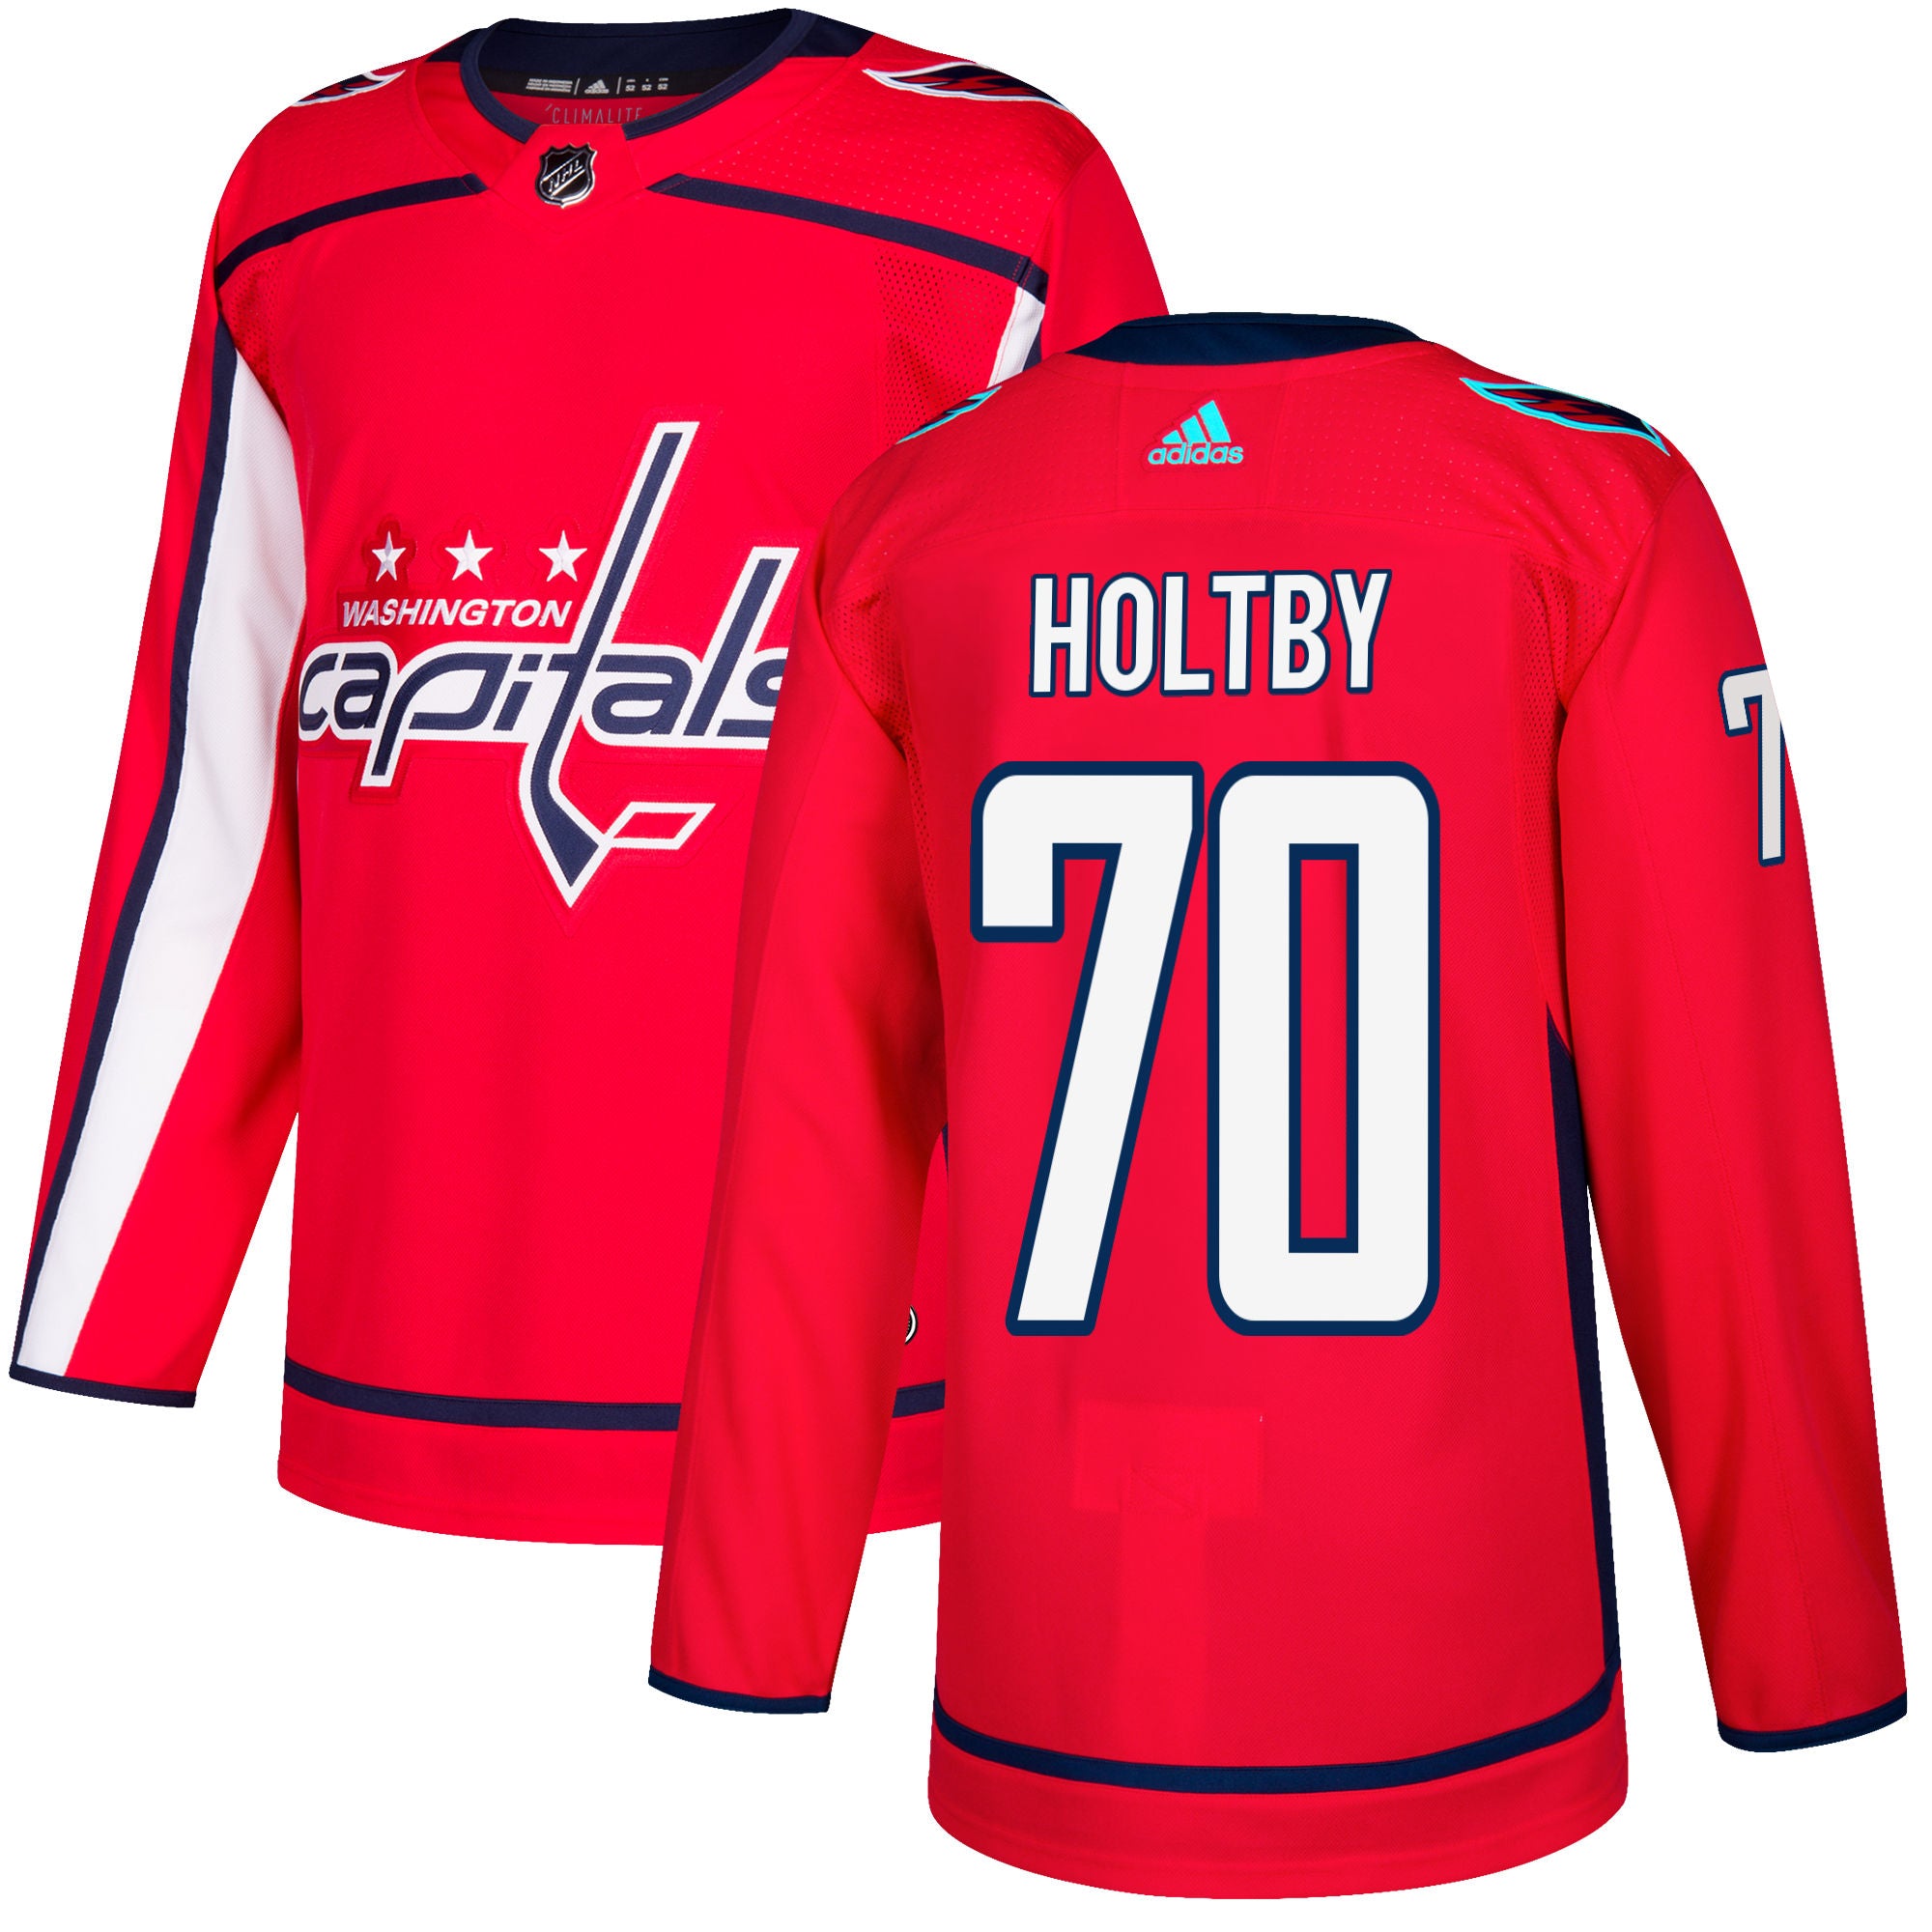 holtby caps jersey | www.euromaxcapital.com